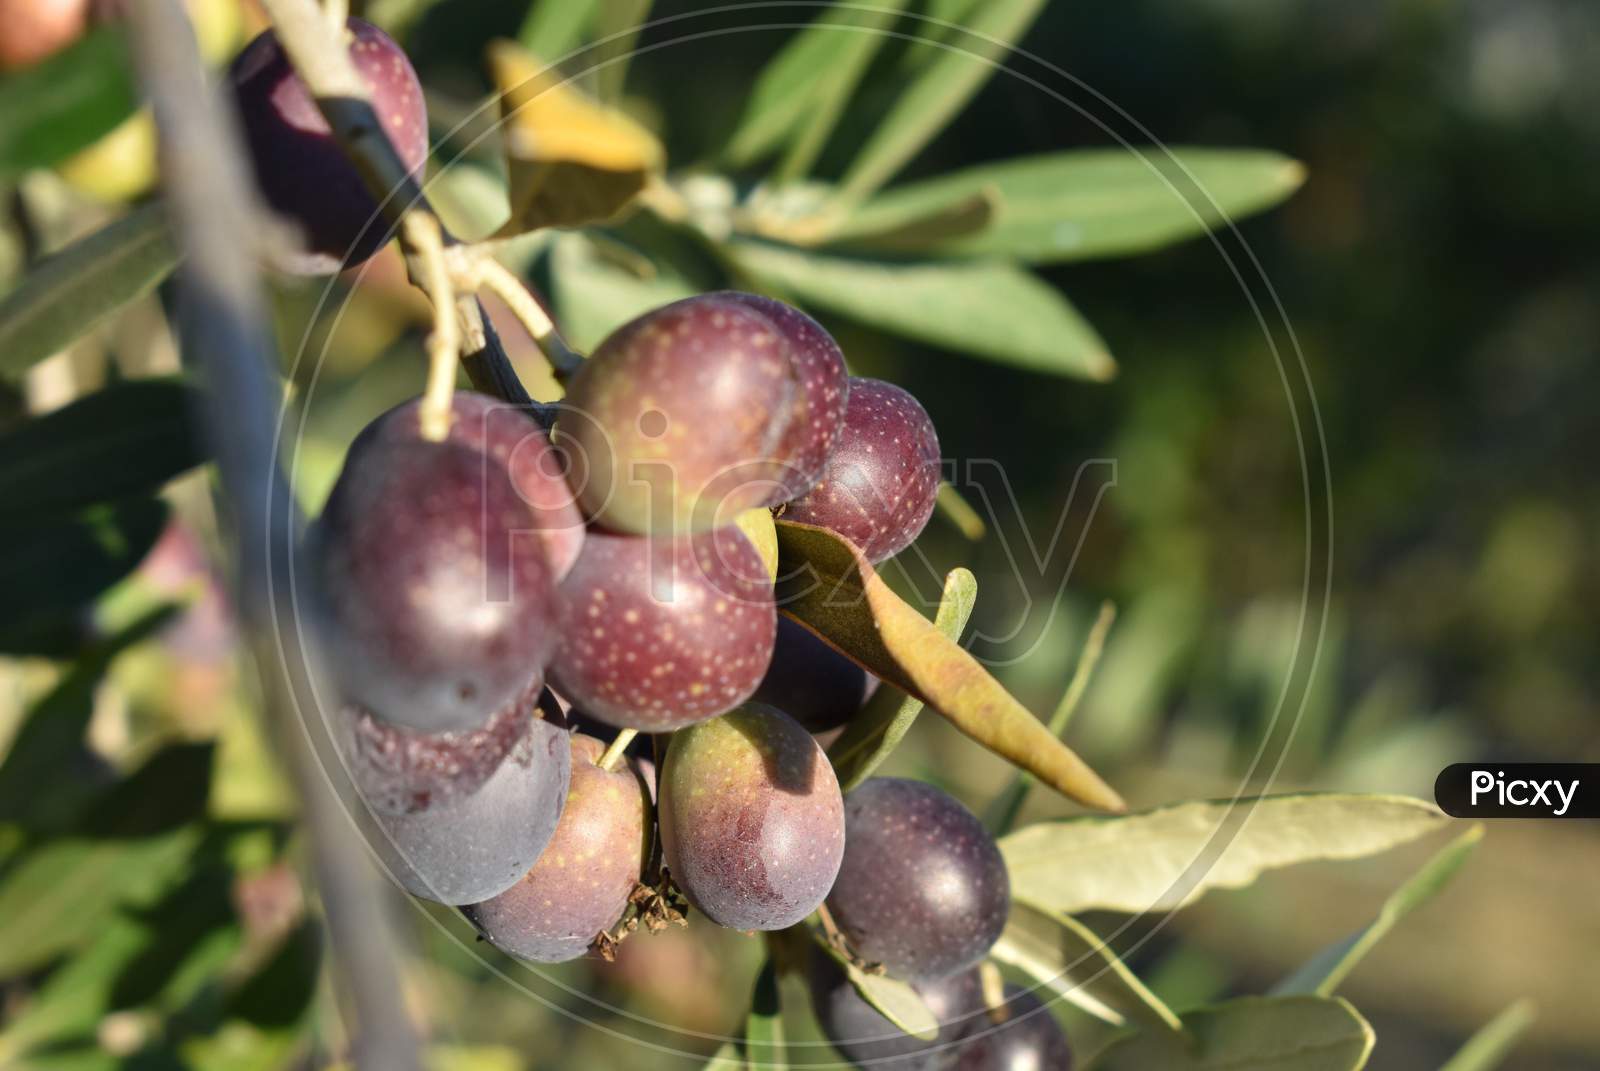 The ripen olive colours were attractive in Tuscany Italy